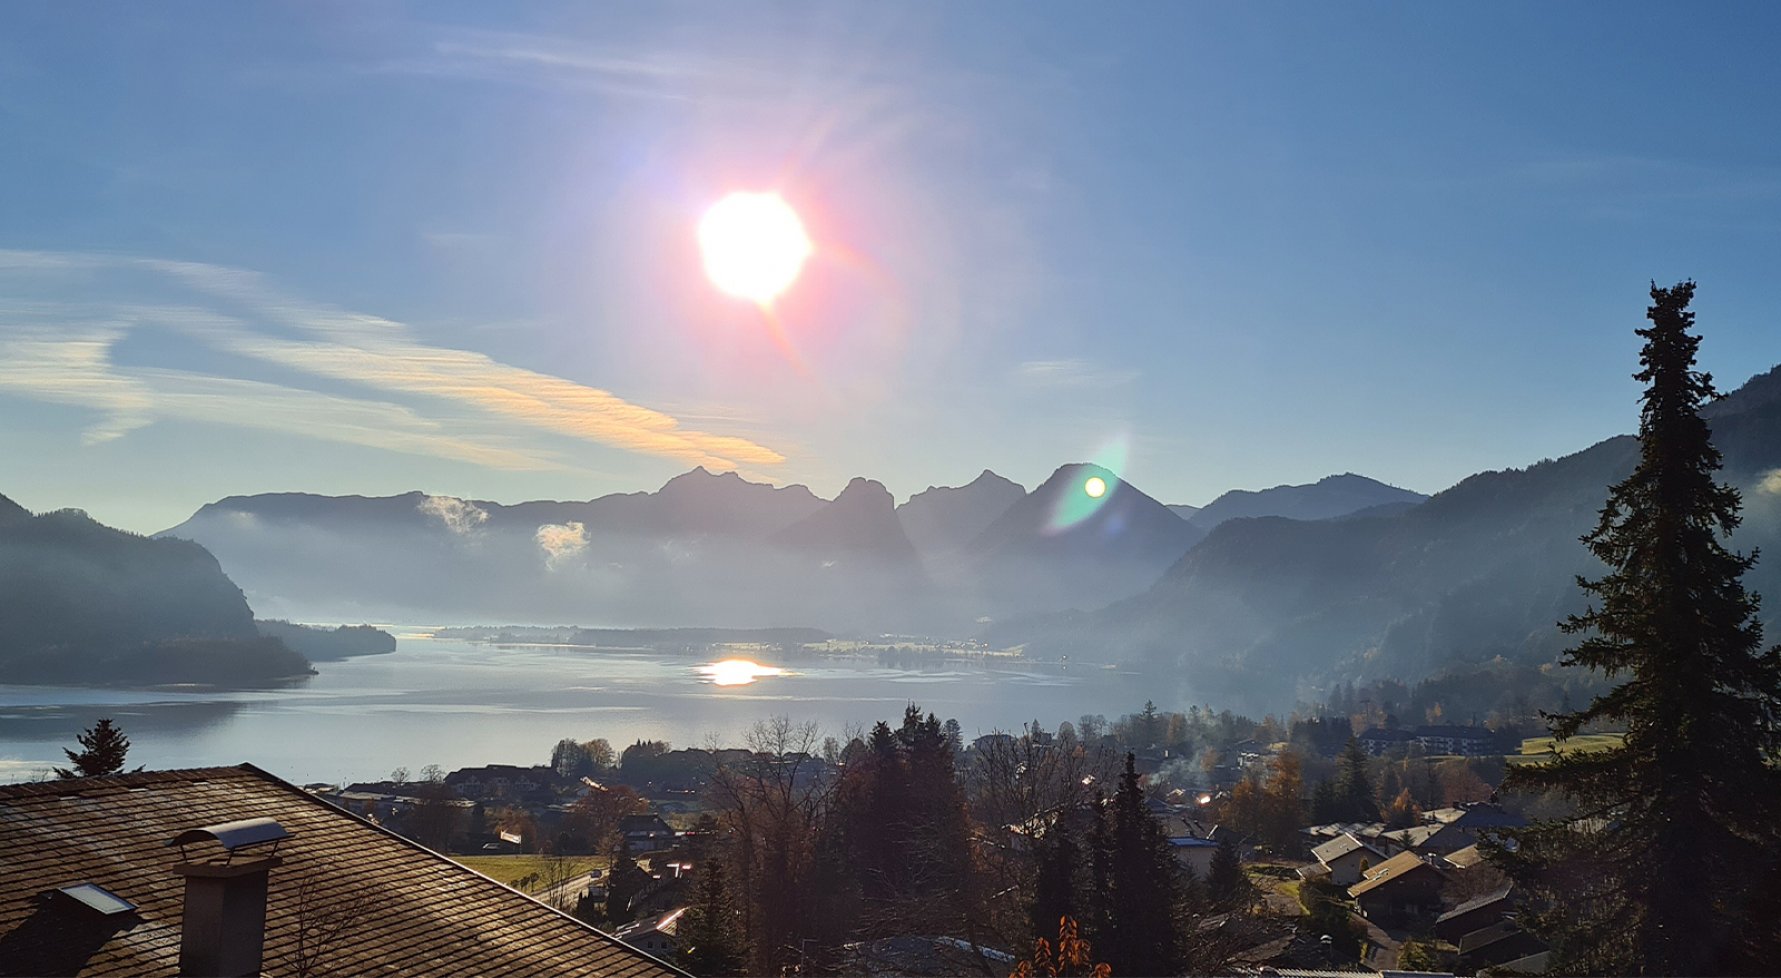 Property in 5340 Wolfgangsee - St. Gilgen: Wolfgangsee panorama! Exclusive living in the Salzkammergut - picture 1